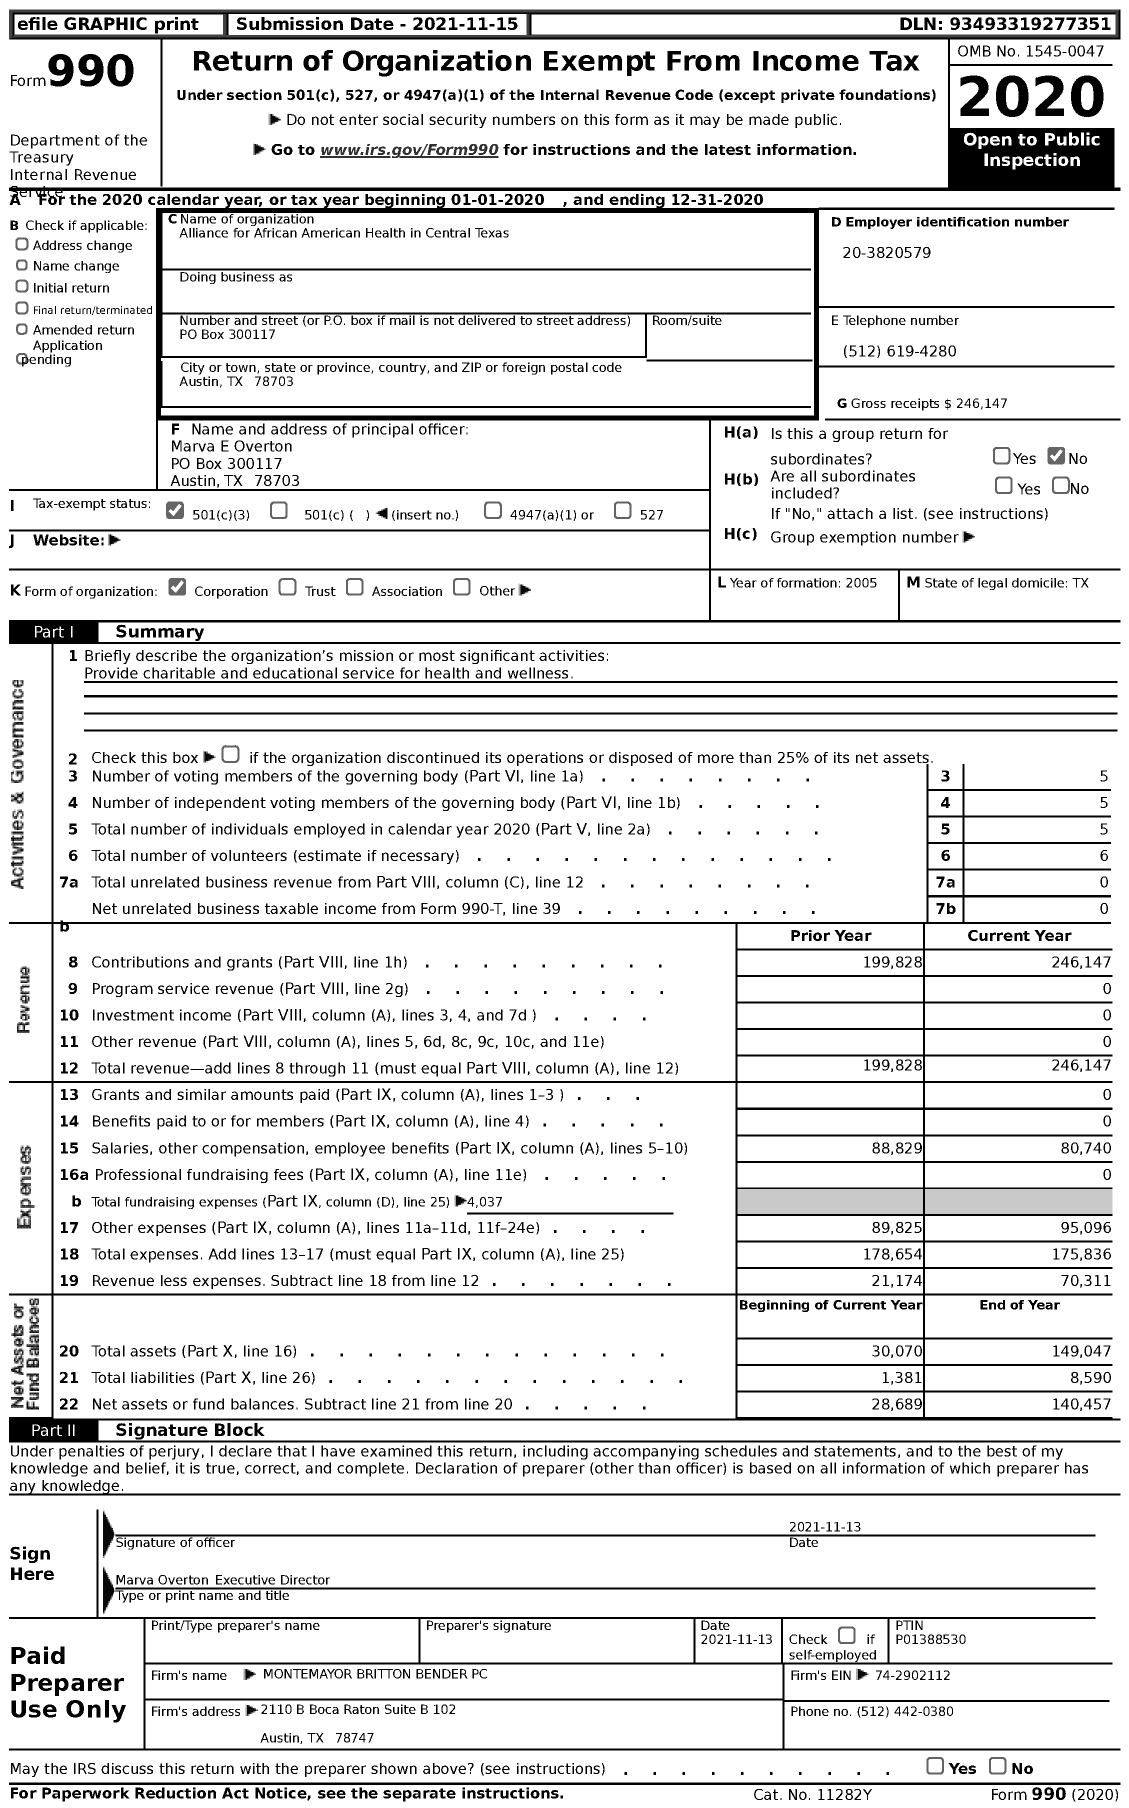 Image of first page of 2020 Form 990 for Alliance for African American Health in Central Texas